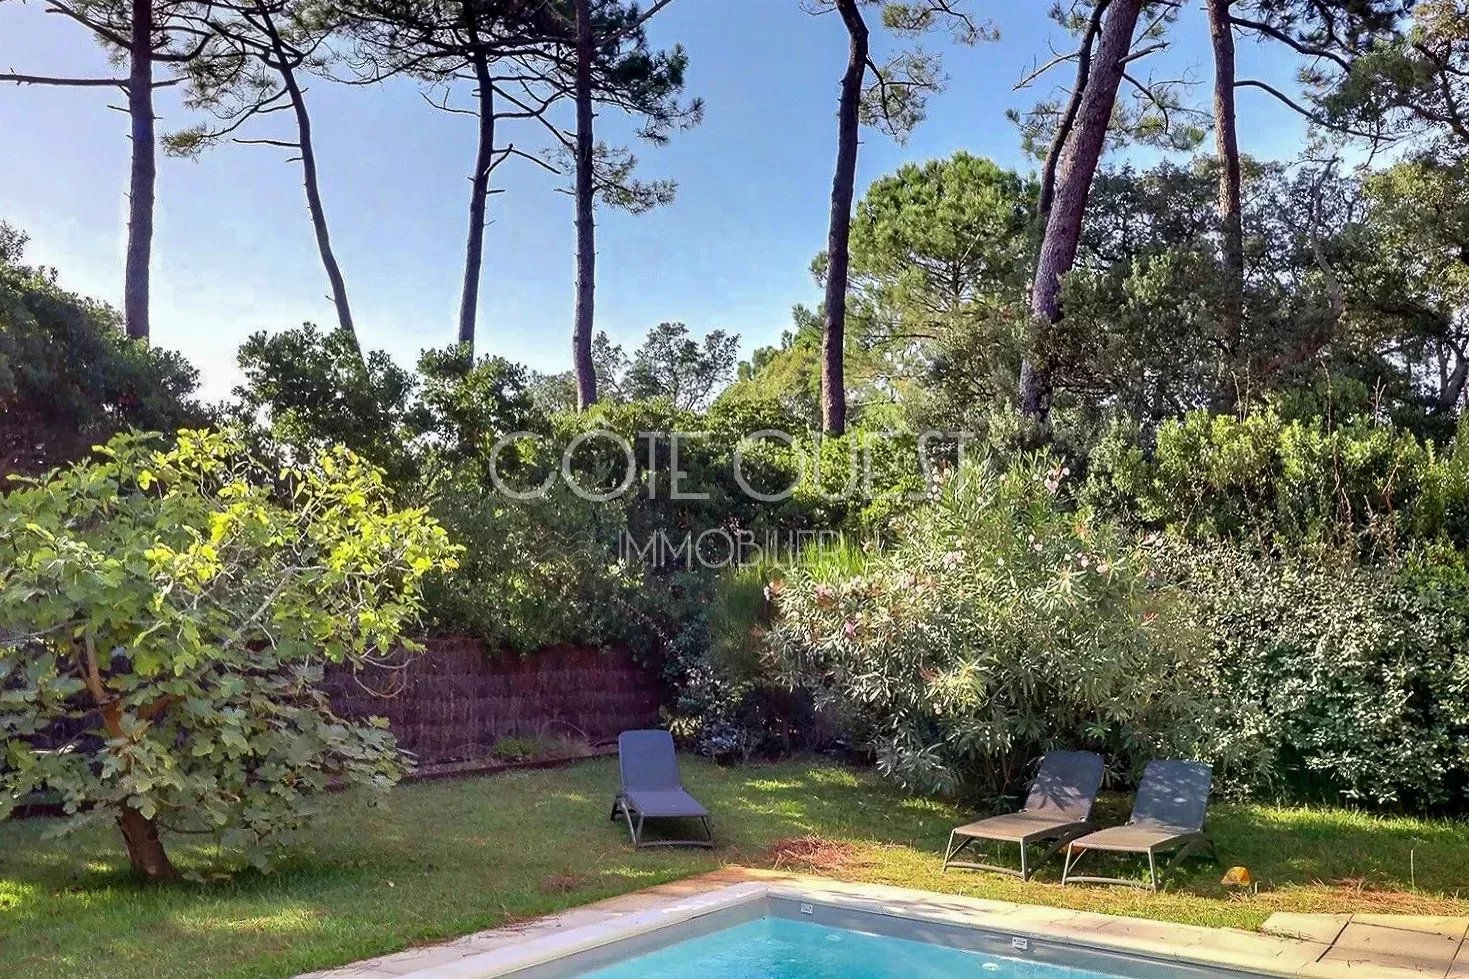 HOSSEGOR – A 7-BED VILLA WITH A SWIMMING POOL